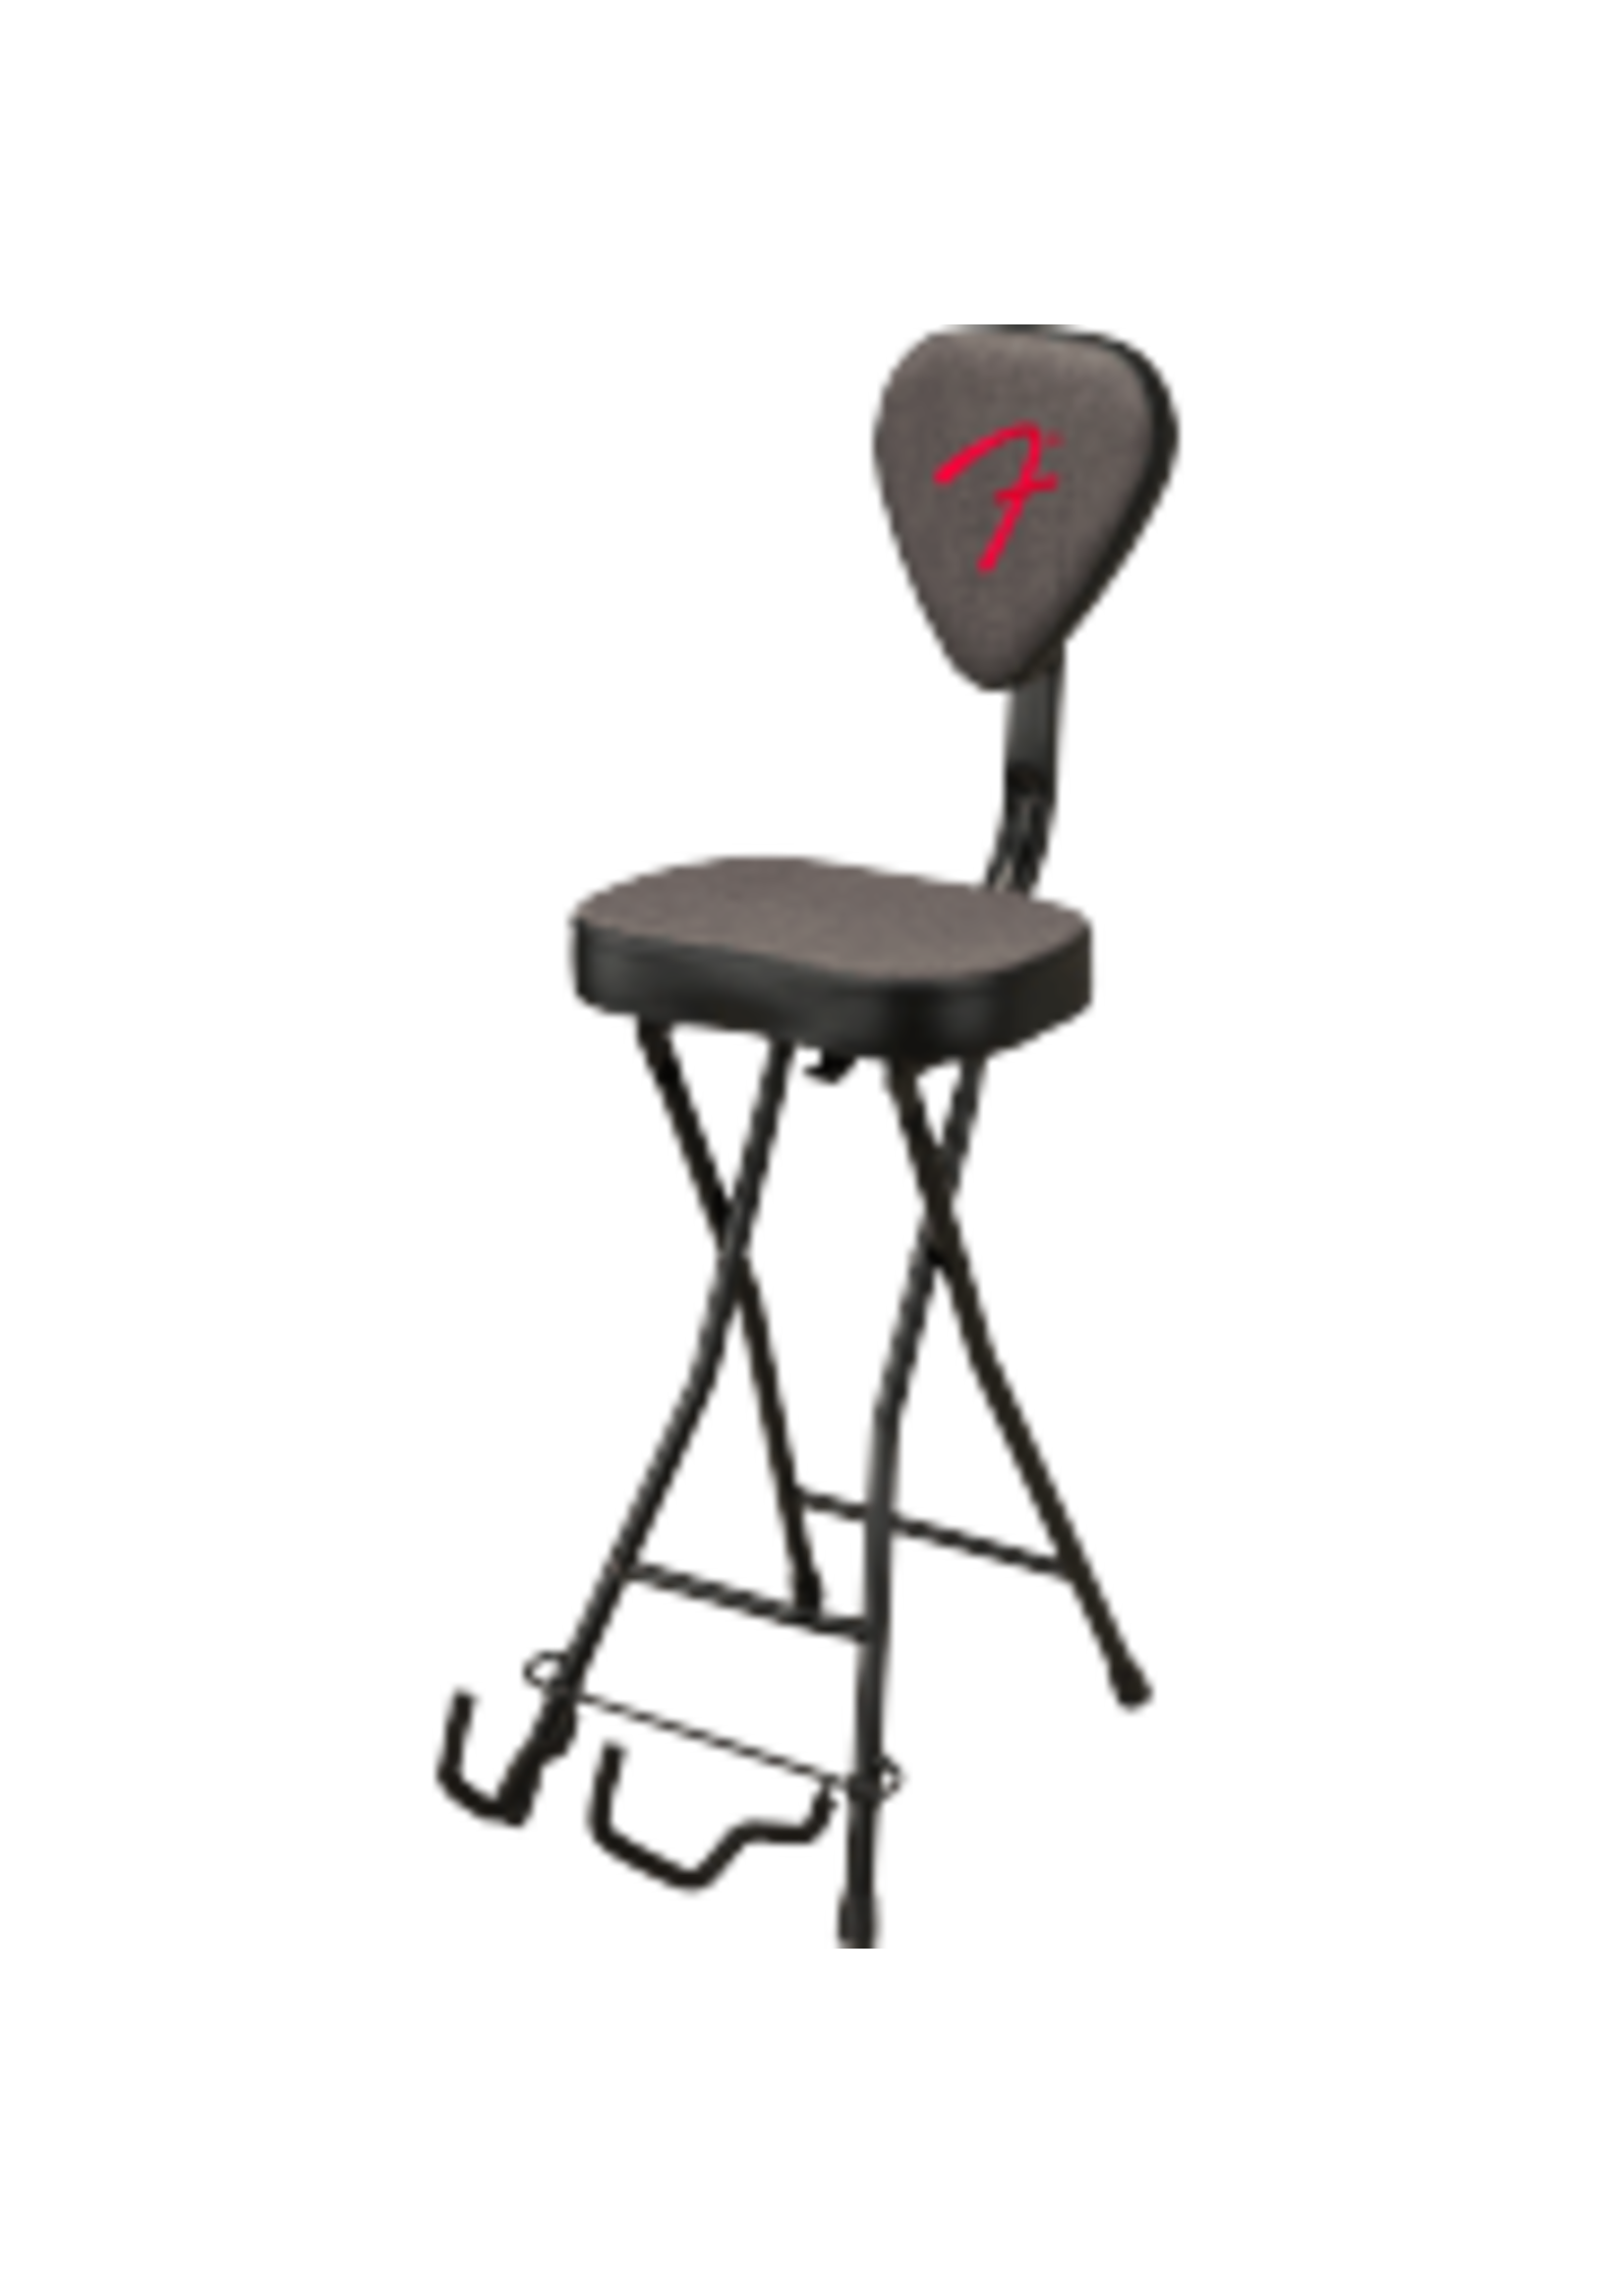 FENDER 351 GUITAR SEAT/STAND-